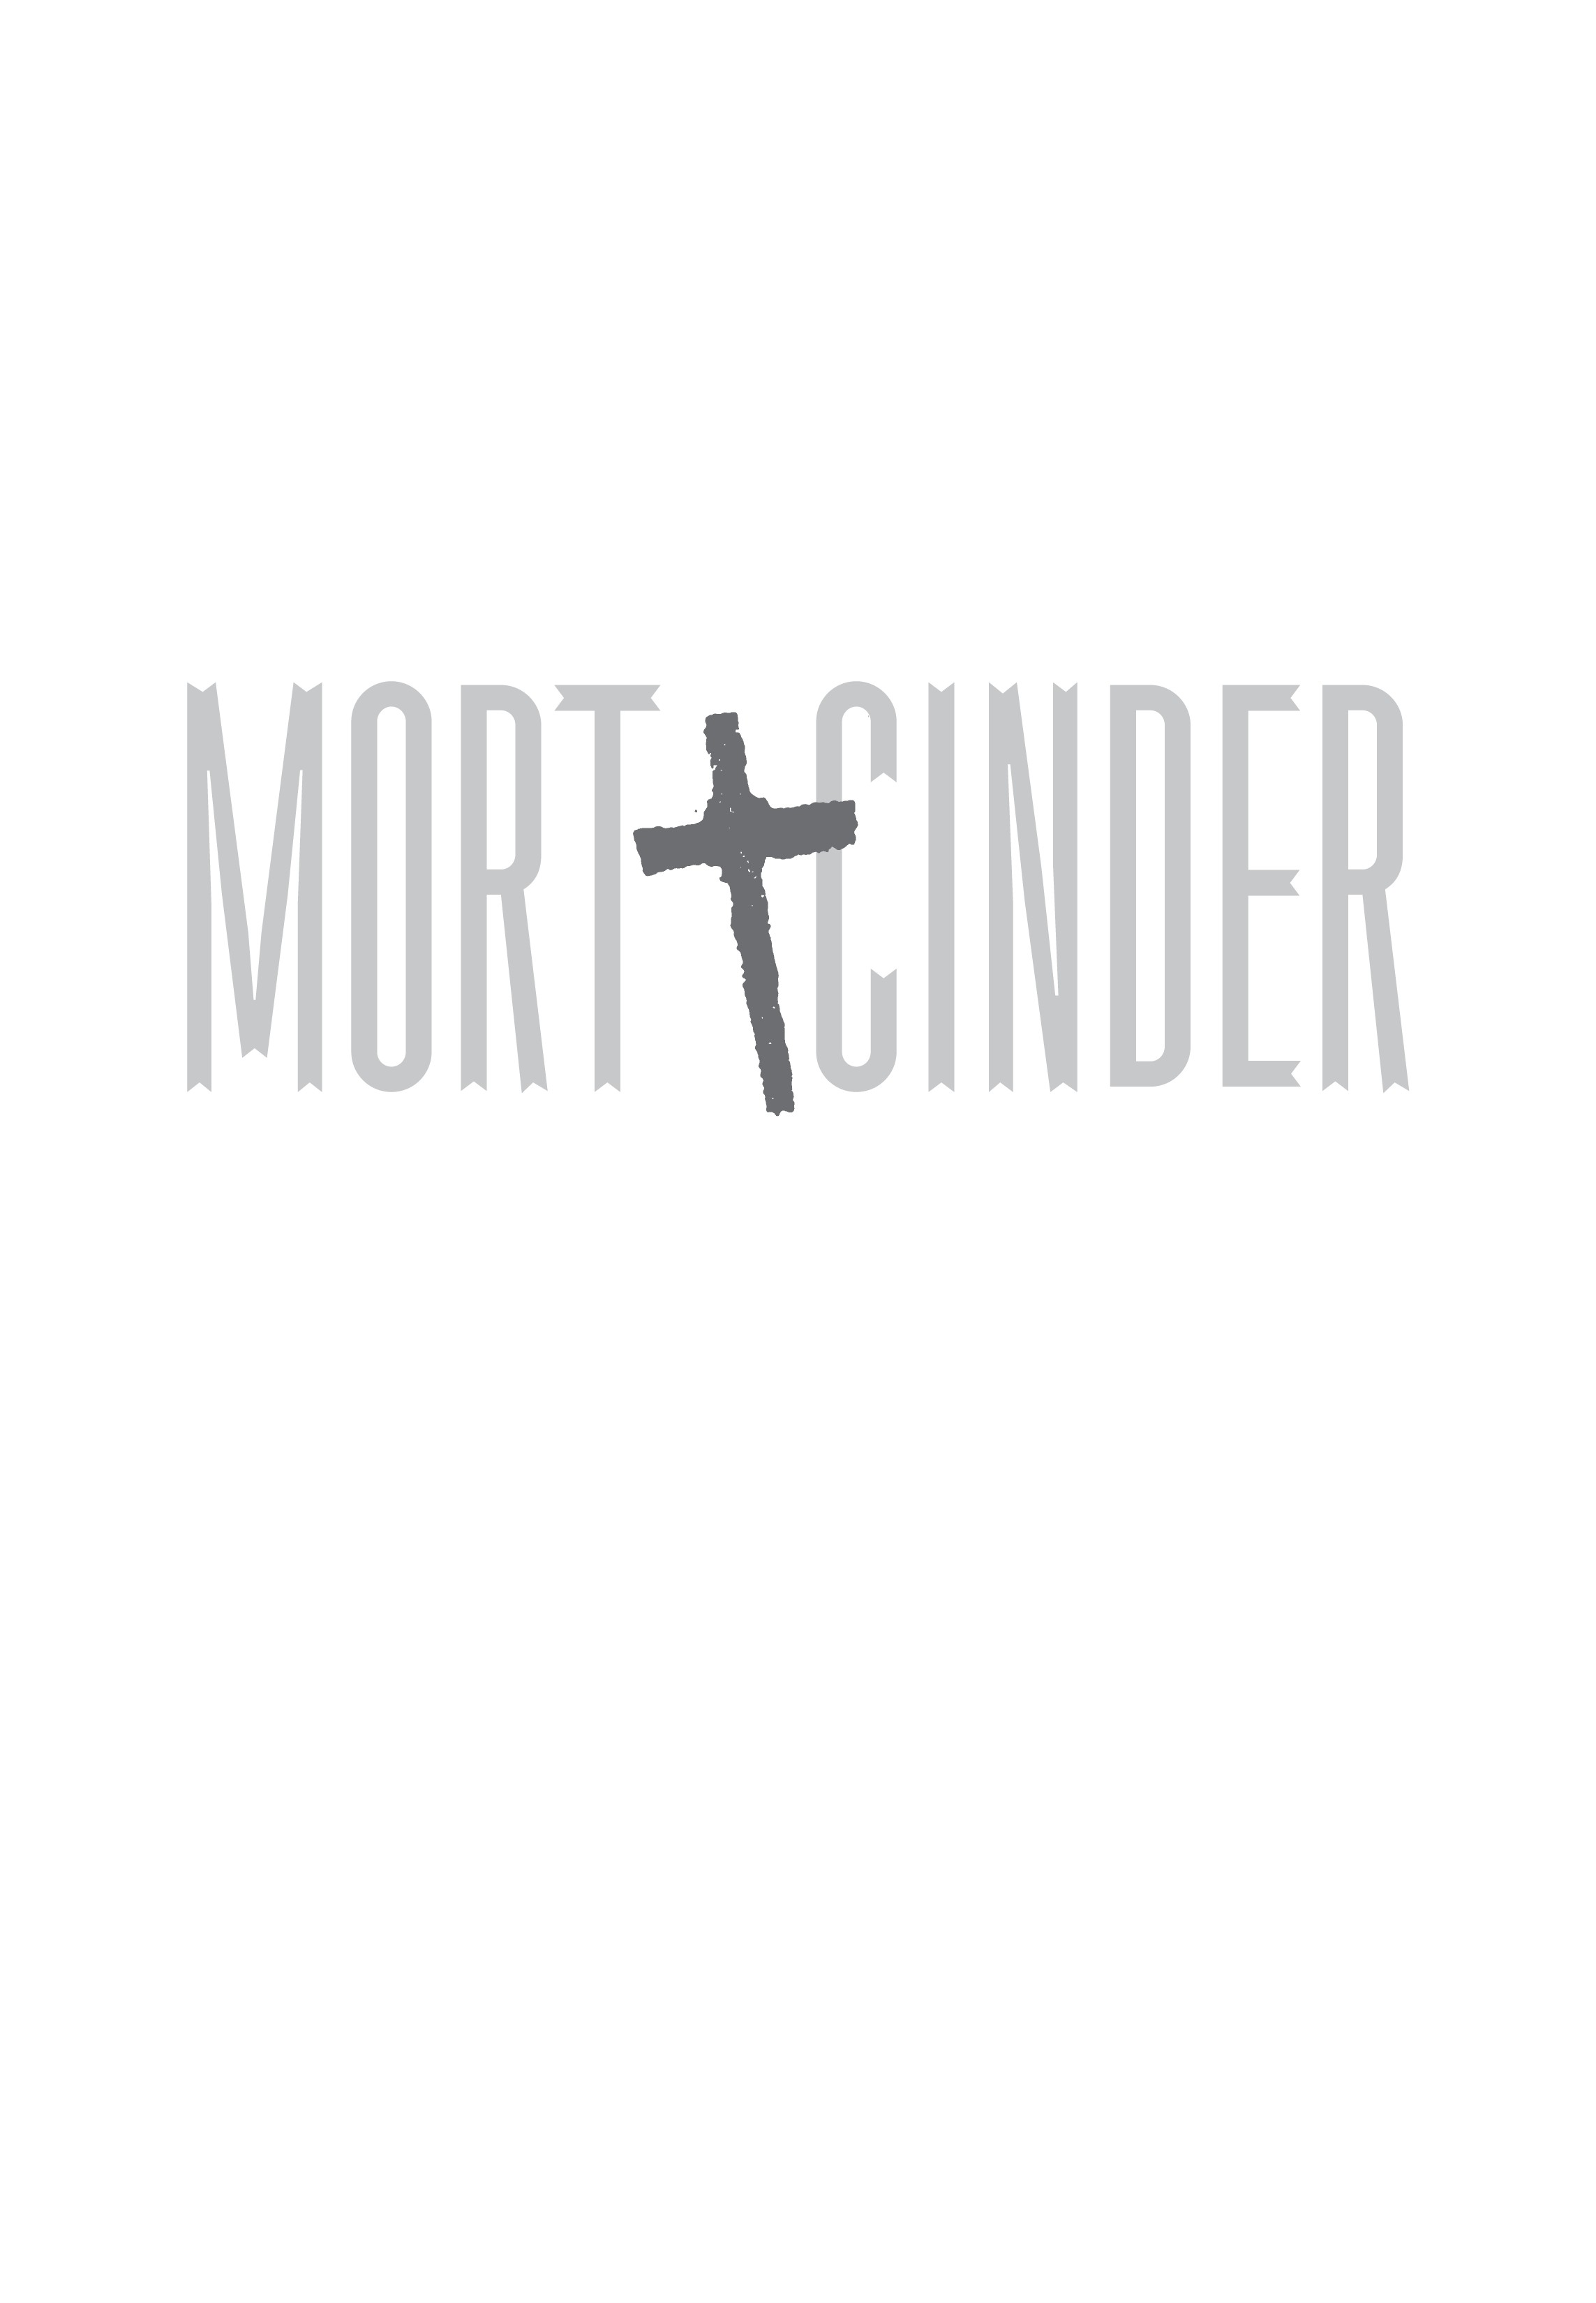 Read online Mort Cinder comic -  Issue # TPB (Part 1) - 2